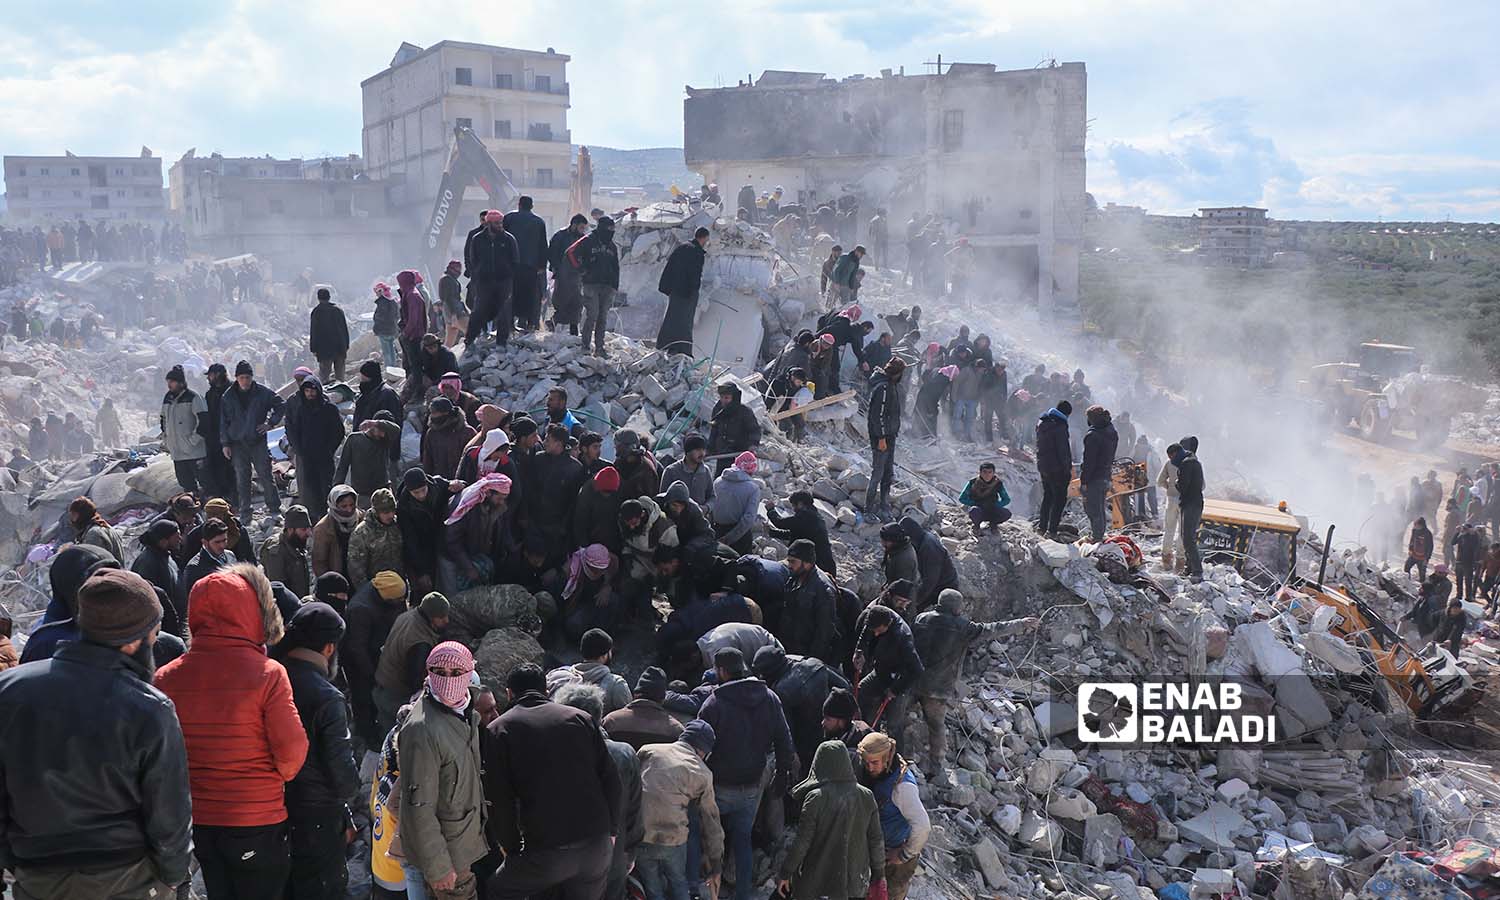 Rescue teams and volunteer residents search for survivors among the rubble of collapsed buildings in the village of Basnia, near Harem town on the Syrian-Turkish border, following the massive earthquake that struck Turkey and northwestern Syria - February 7, 2023 (Enab Baladi/Mohammad Nasan Dabel)